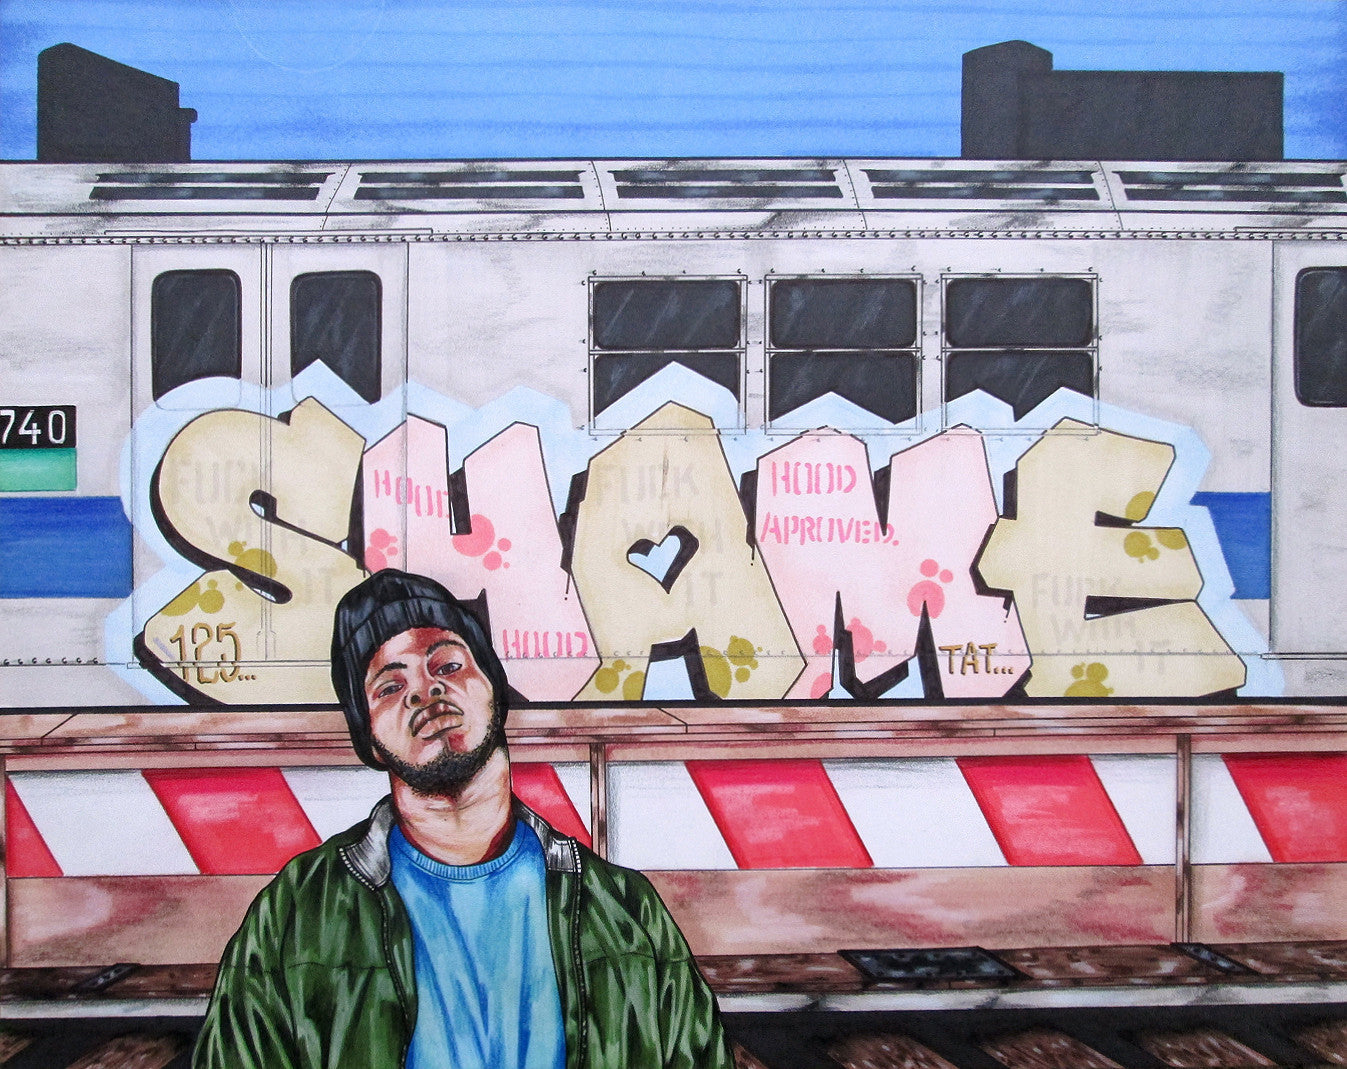 SHAME 125  "Hood Approved"  Drawing